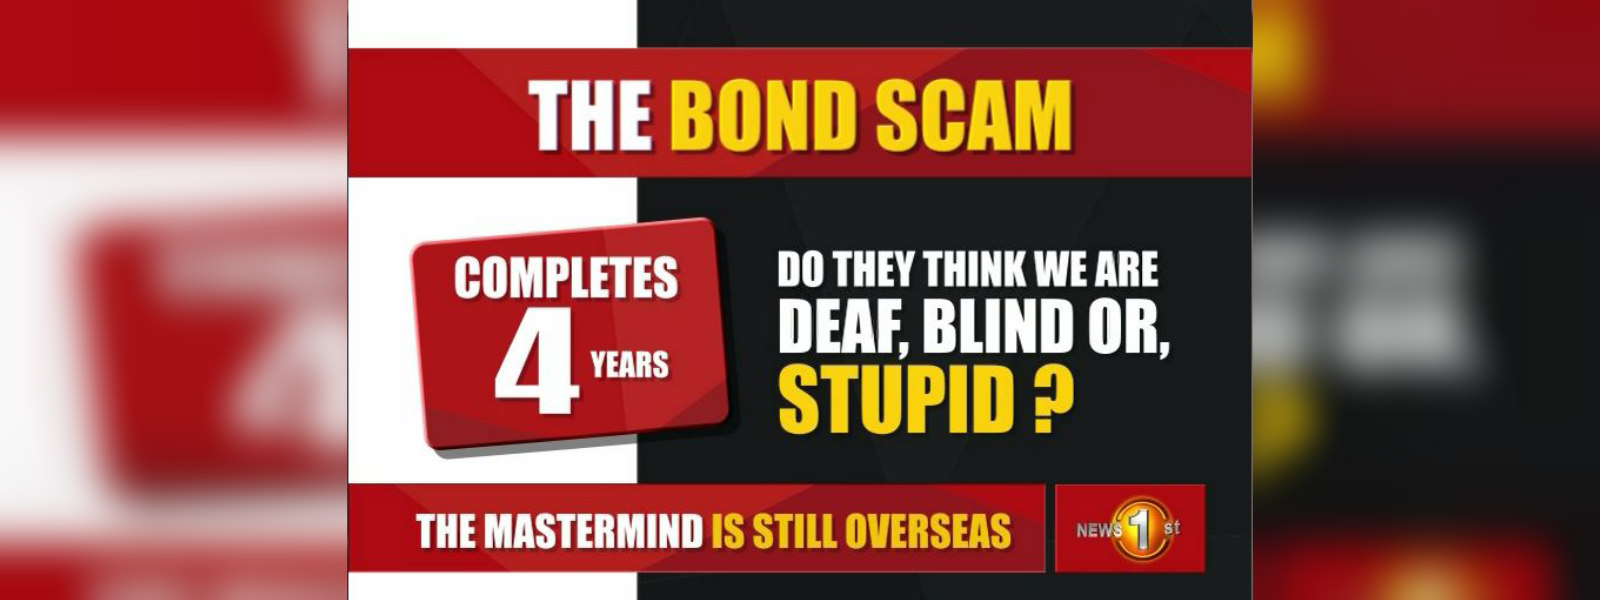  Four years since the infamous bond scam